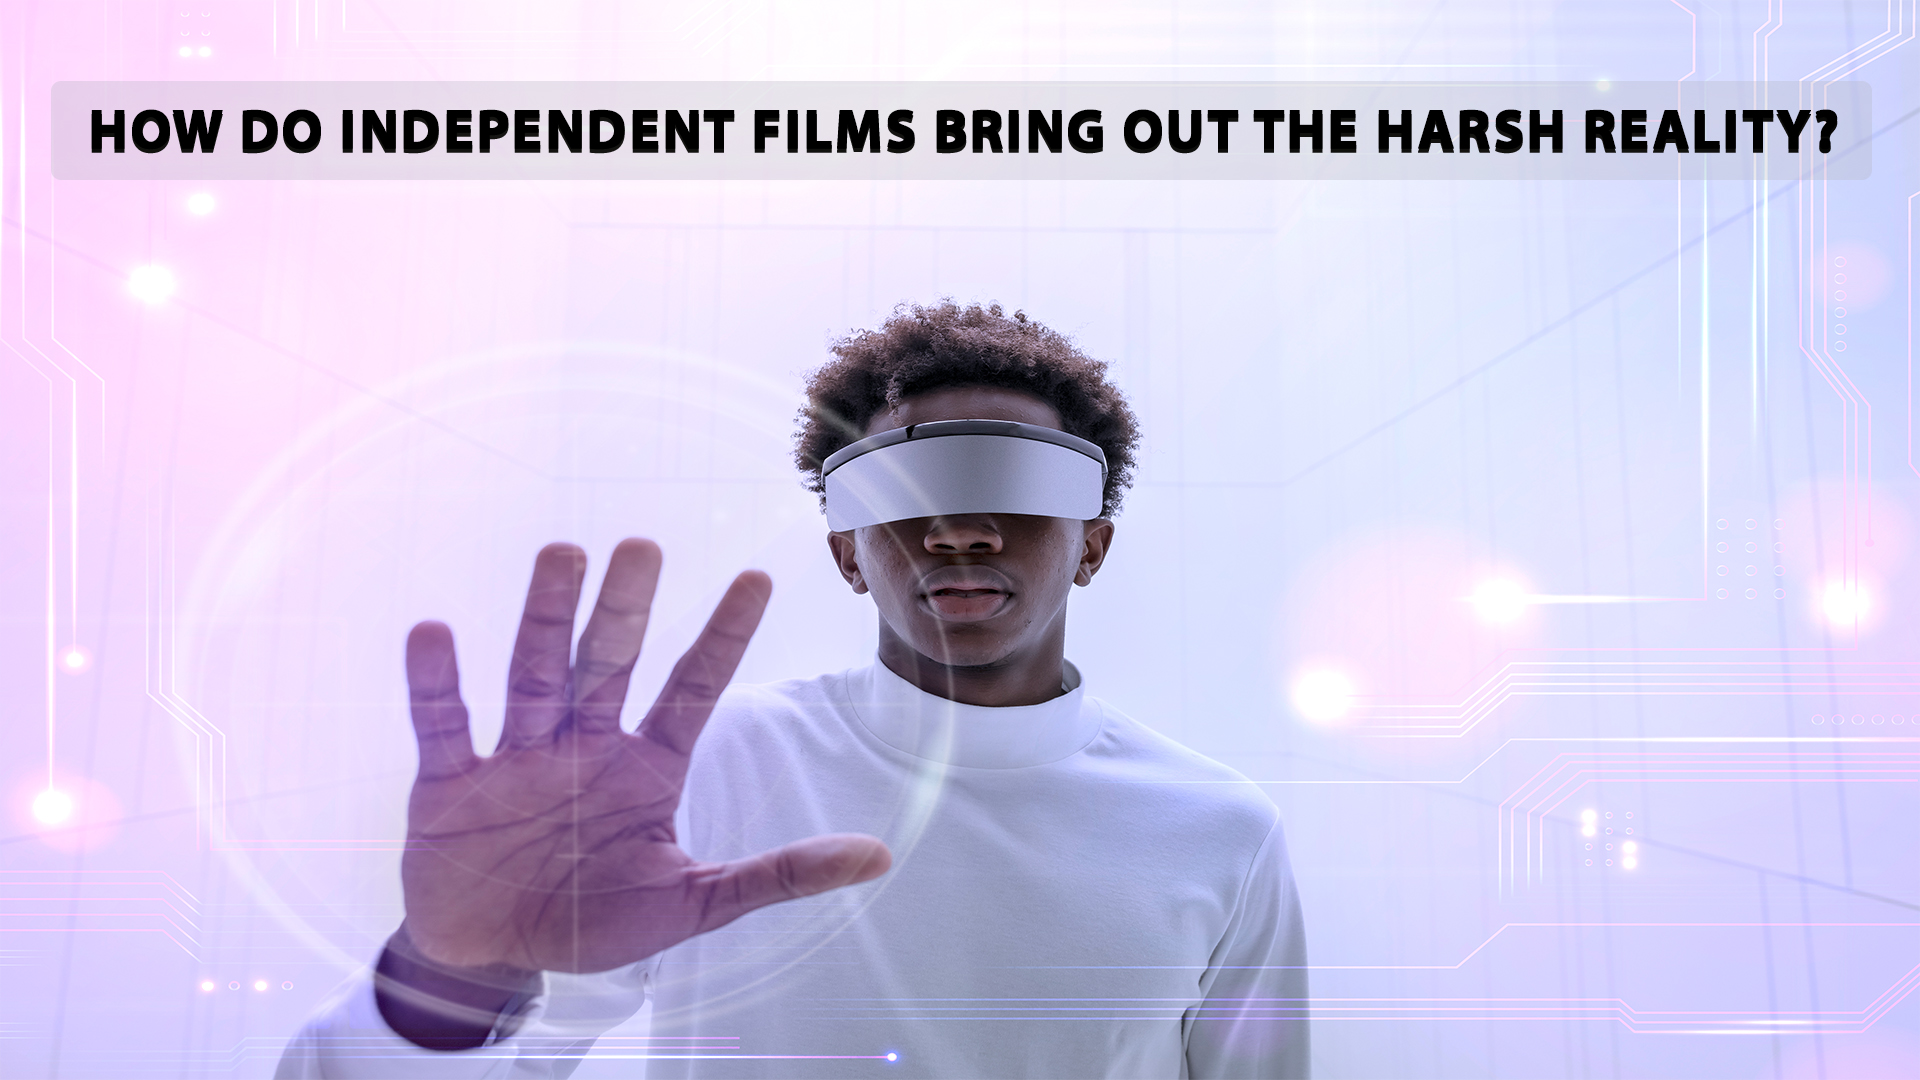 How do Independent Films bring out the harsh reality?